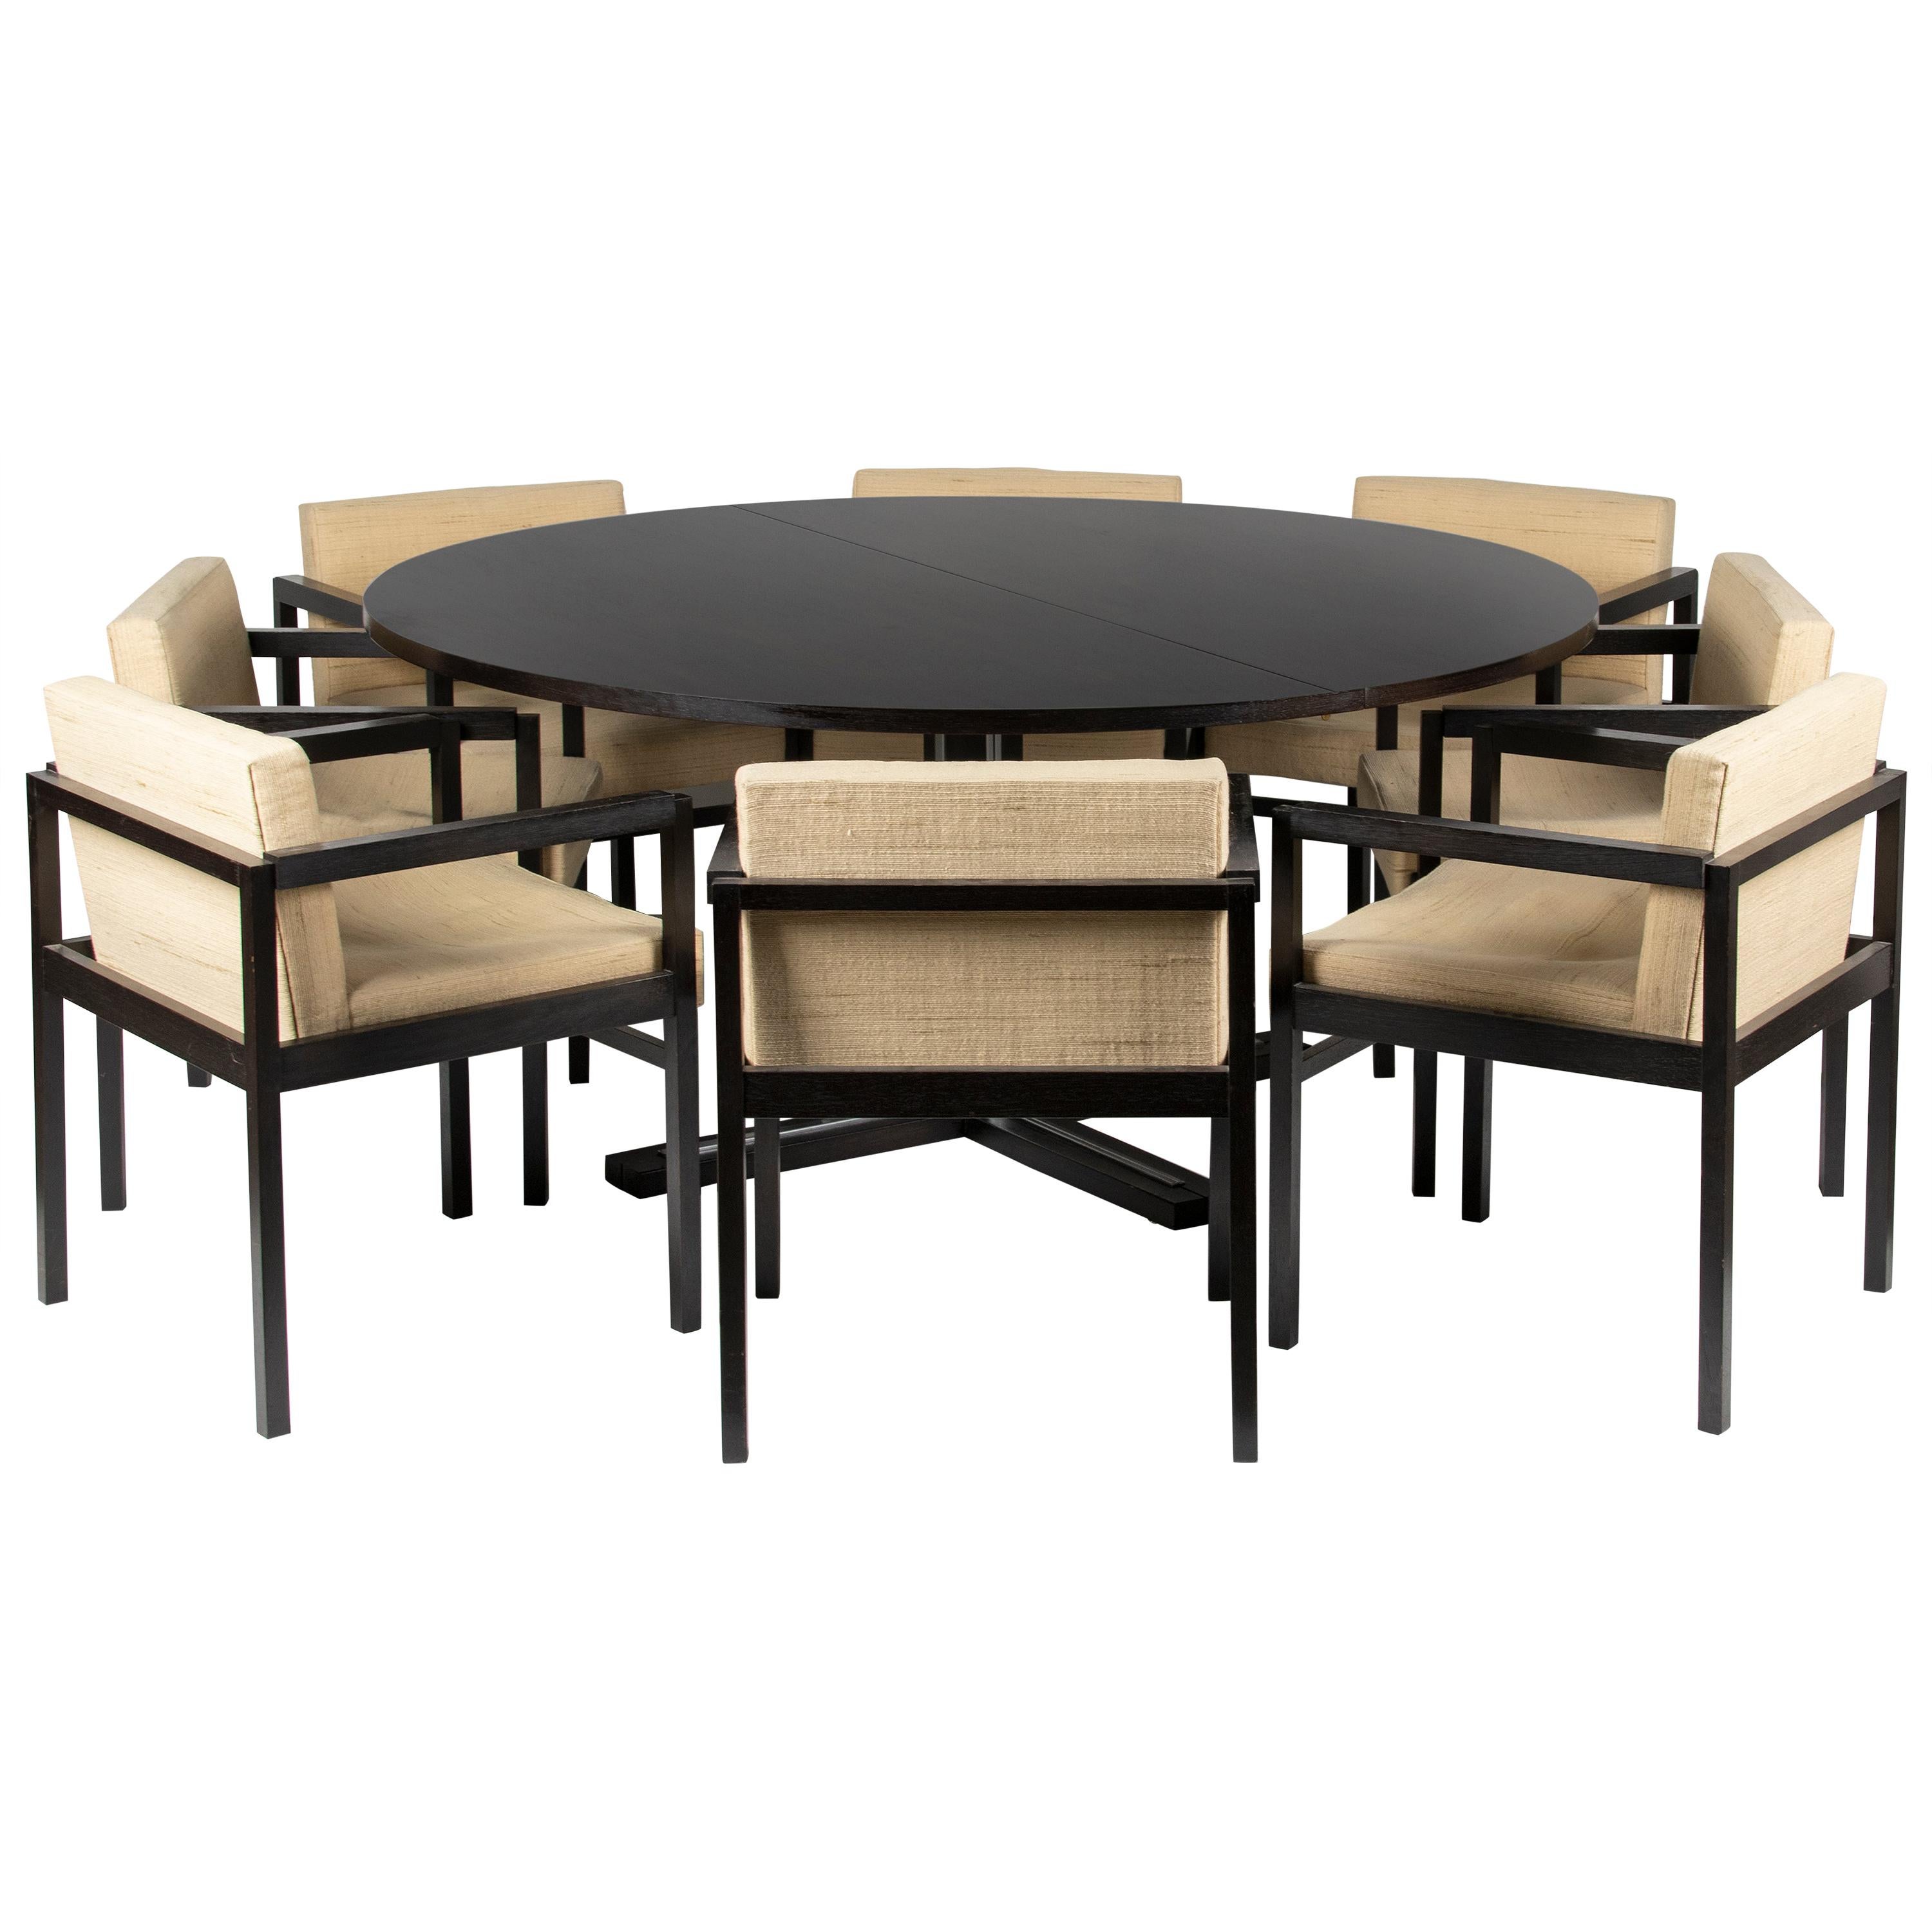 Mid-20th Century Modern Round Dining Table, extendable with 8 Matching Chairs